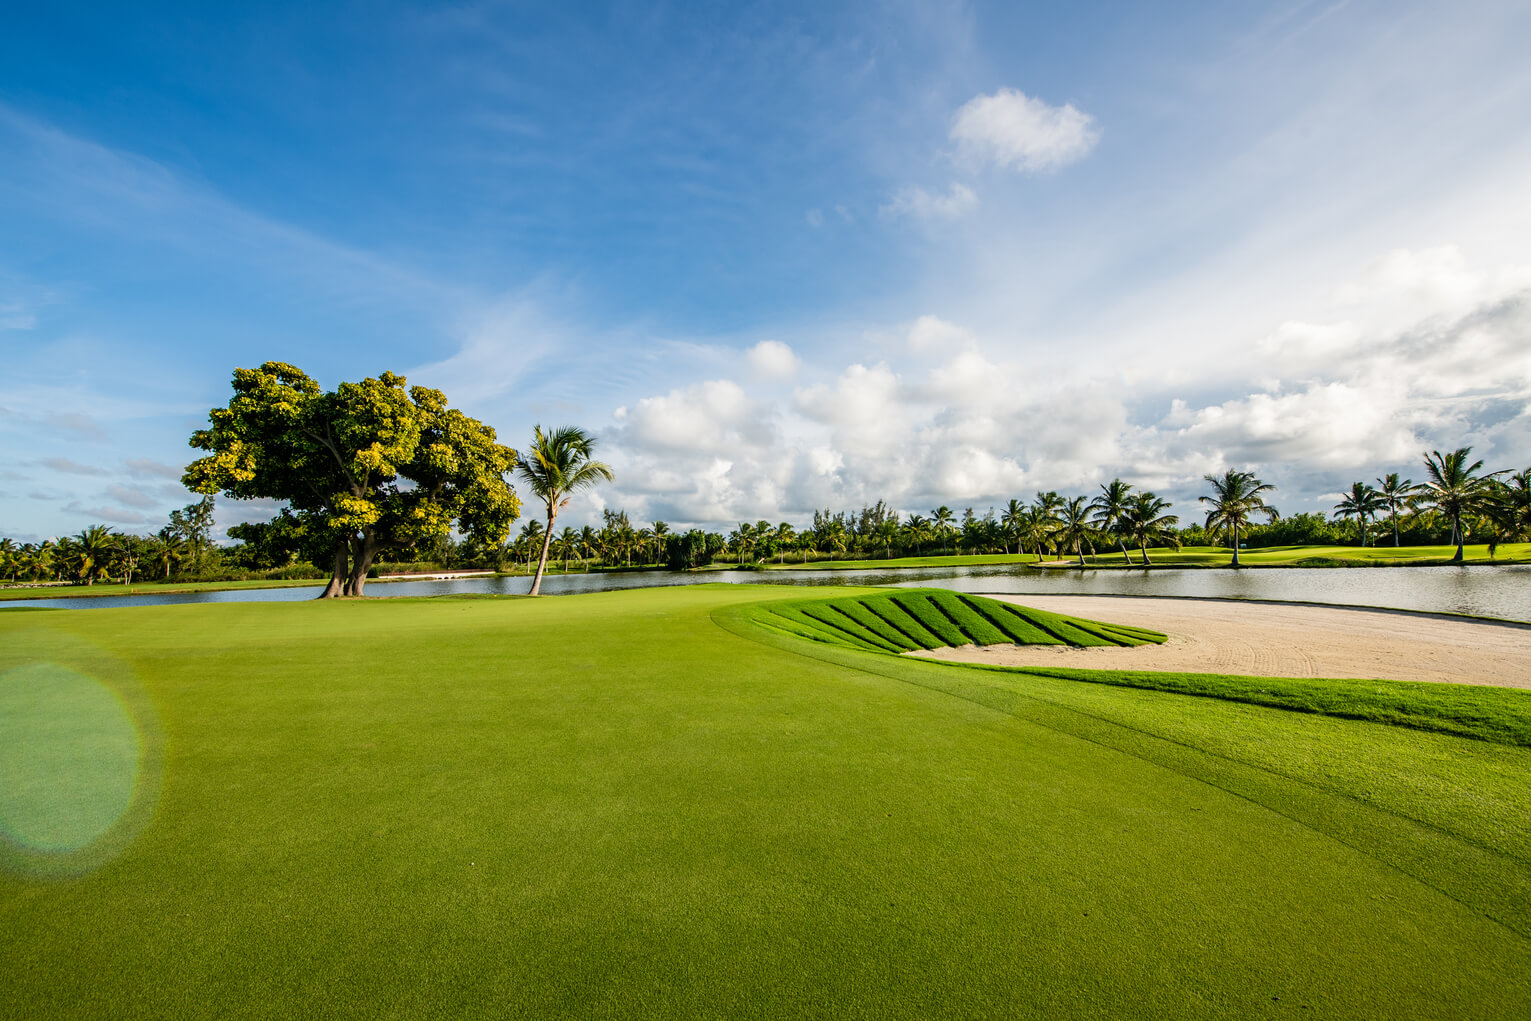 Golf breaks: The Lakes Golf Course at the Barcelo Bávarro Grand Resort 